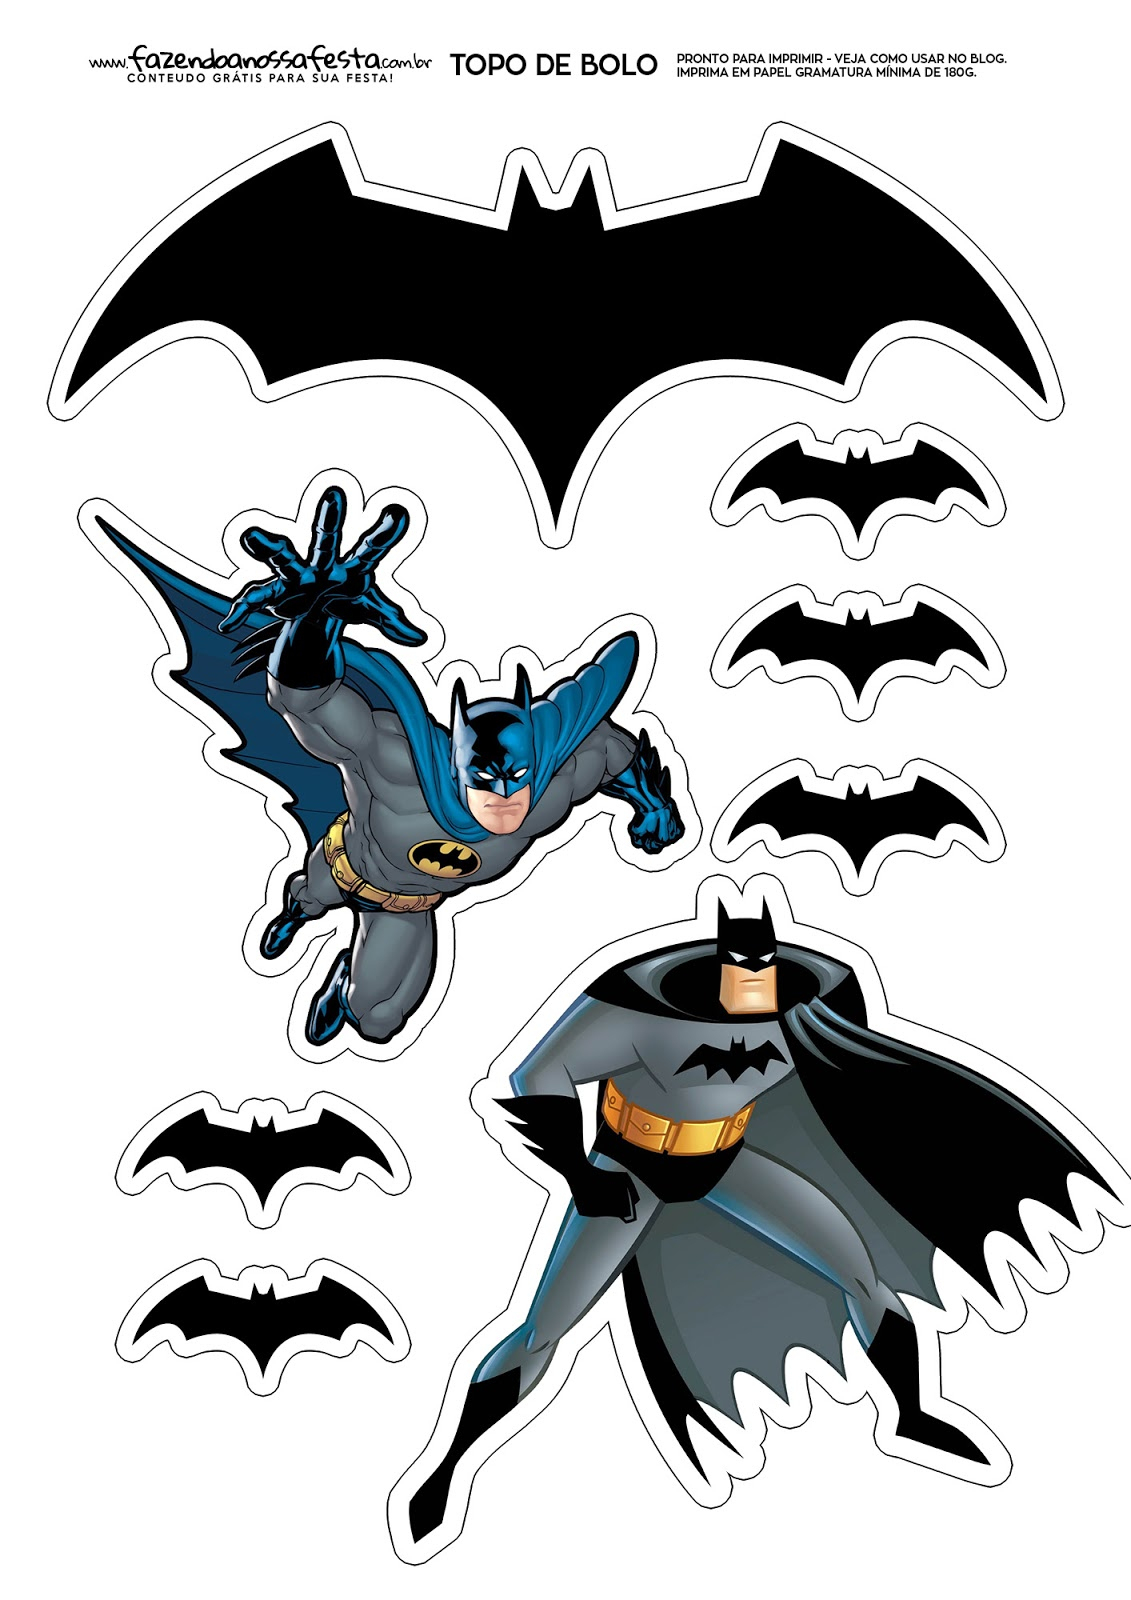 Batman: Free Printable Cake Toppers. - Oh My Fiesta! For Geeks - Batman Cupcake Toppers Free Printable